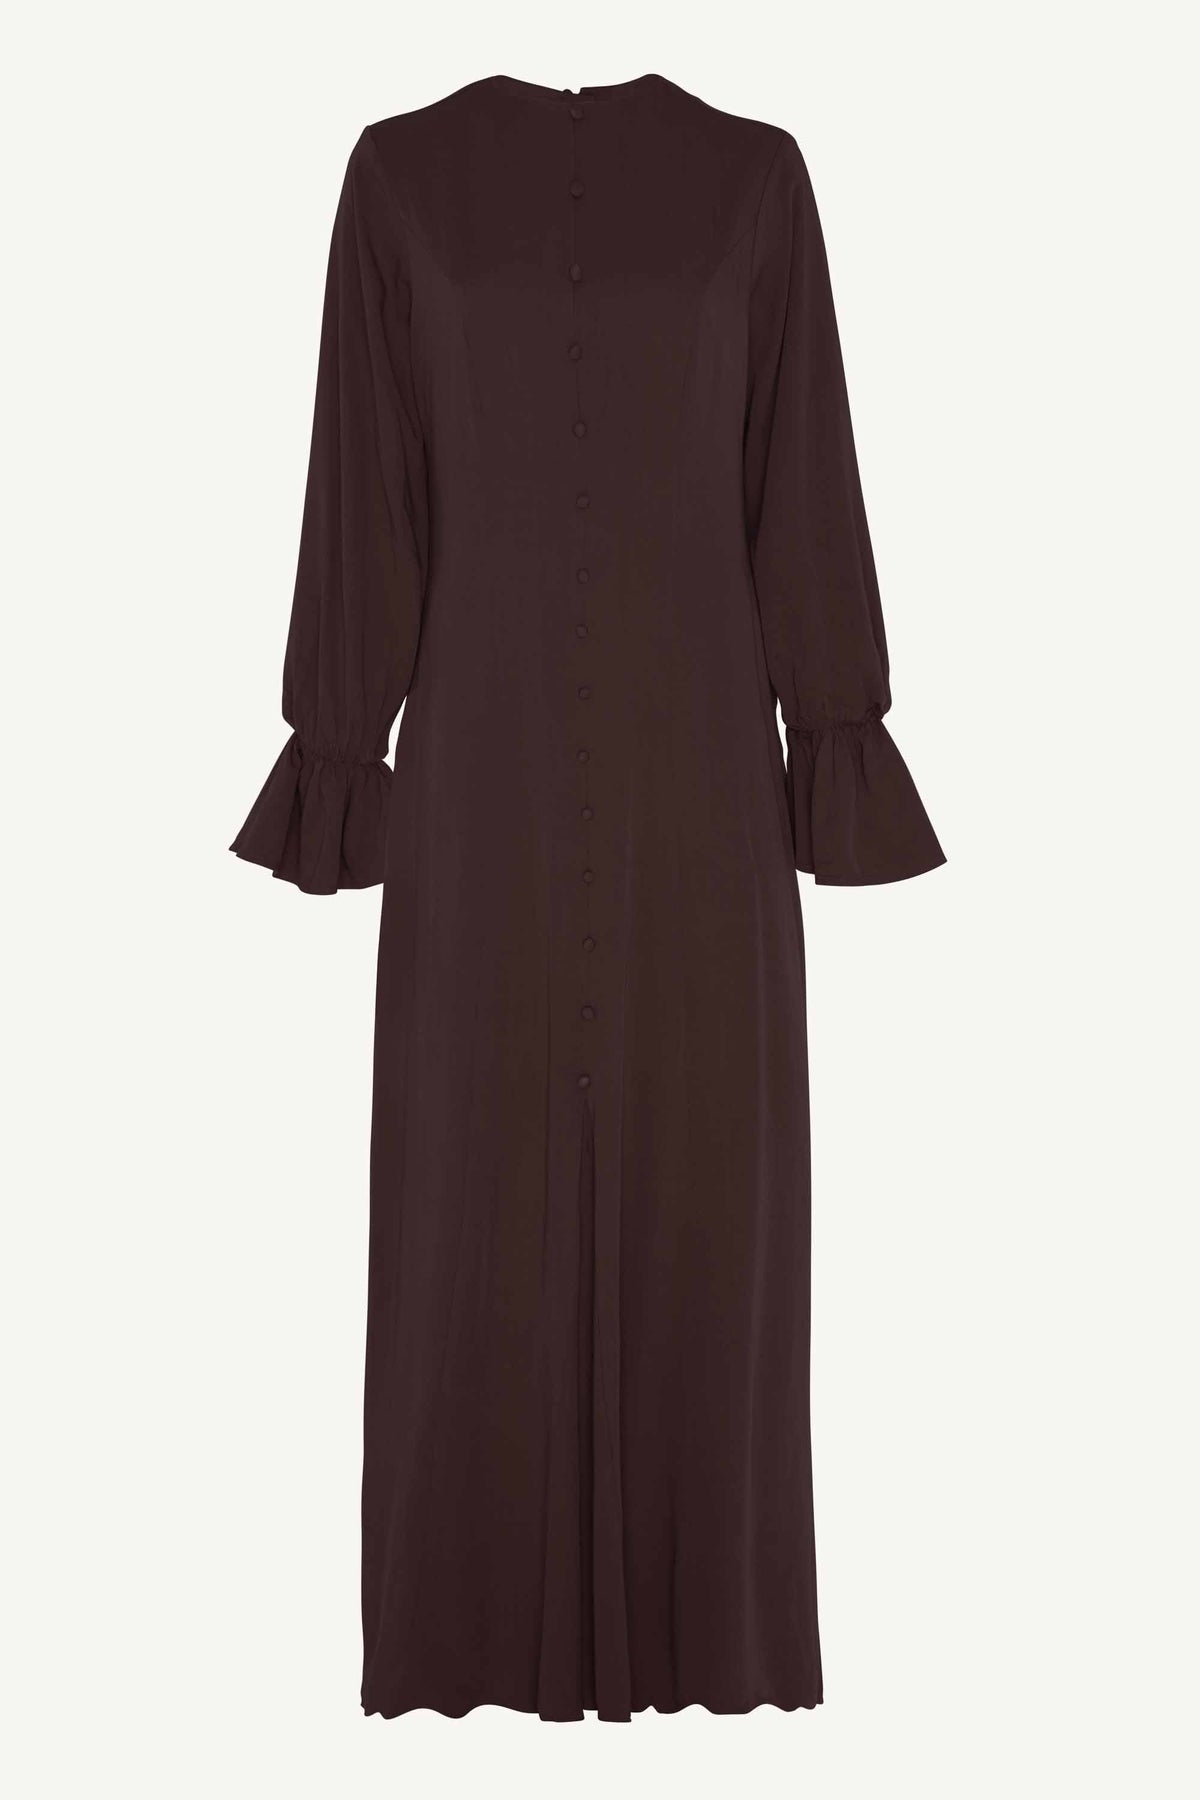 Deanna Button Front Maxi Dress - Brown Clothing epschoolboard 